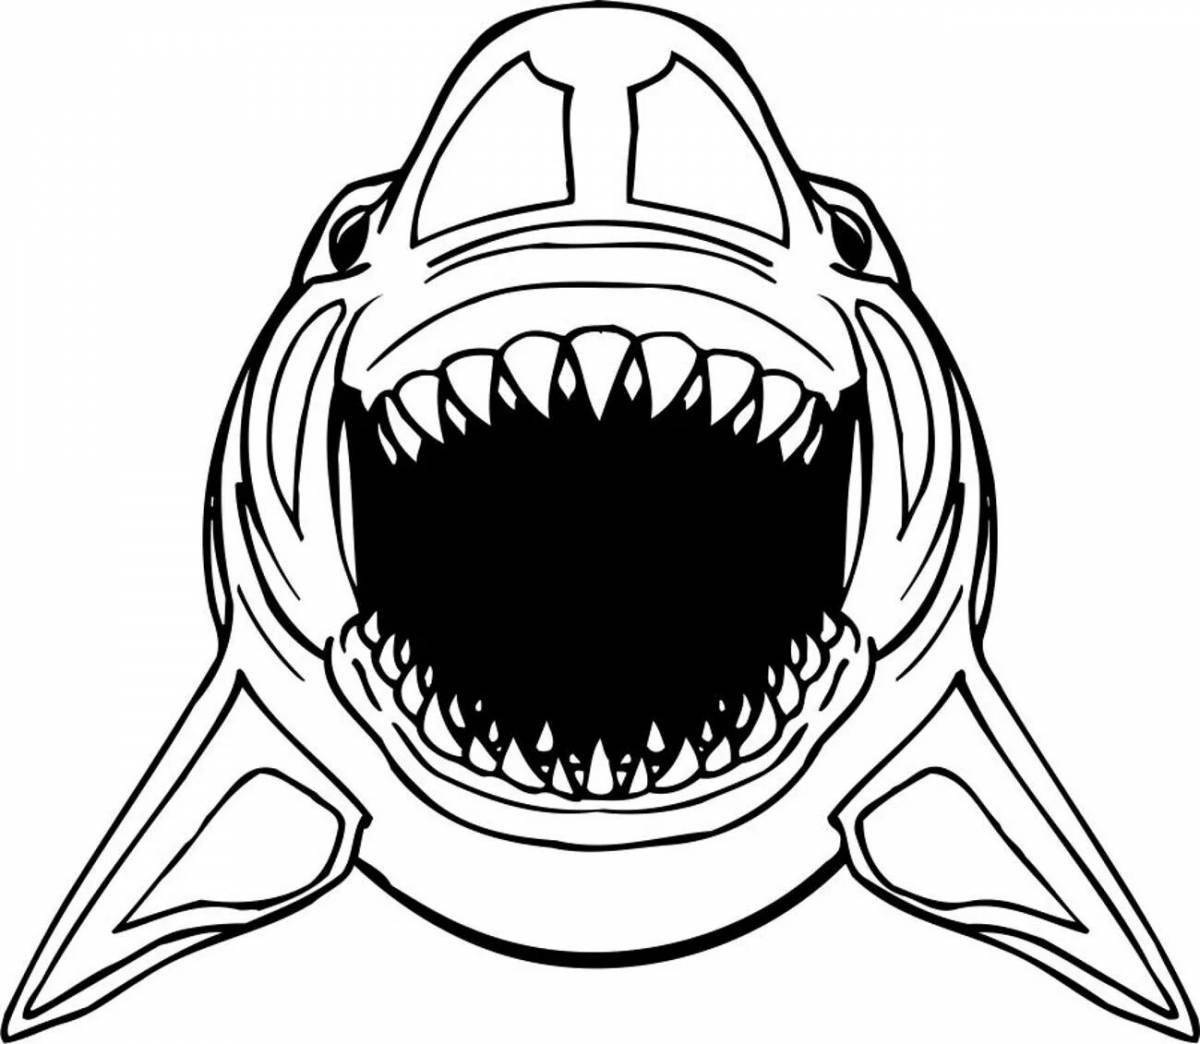 Coloring book bold angry shark